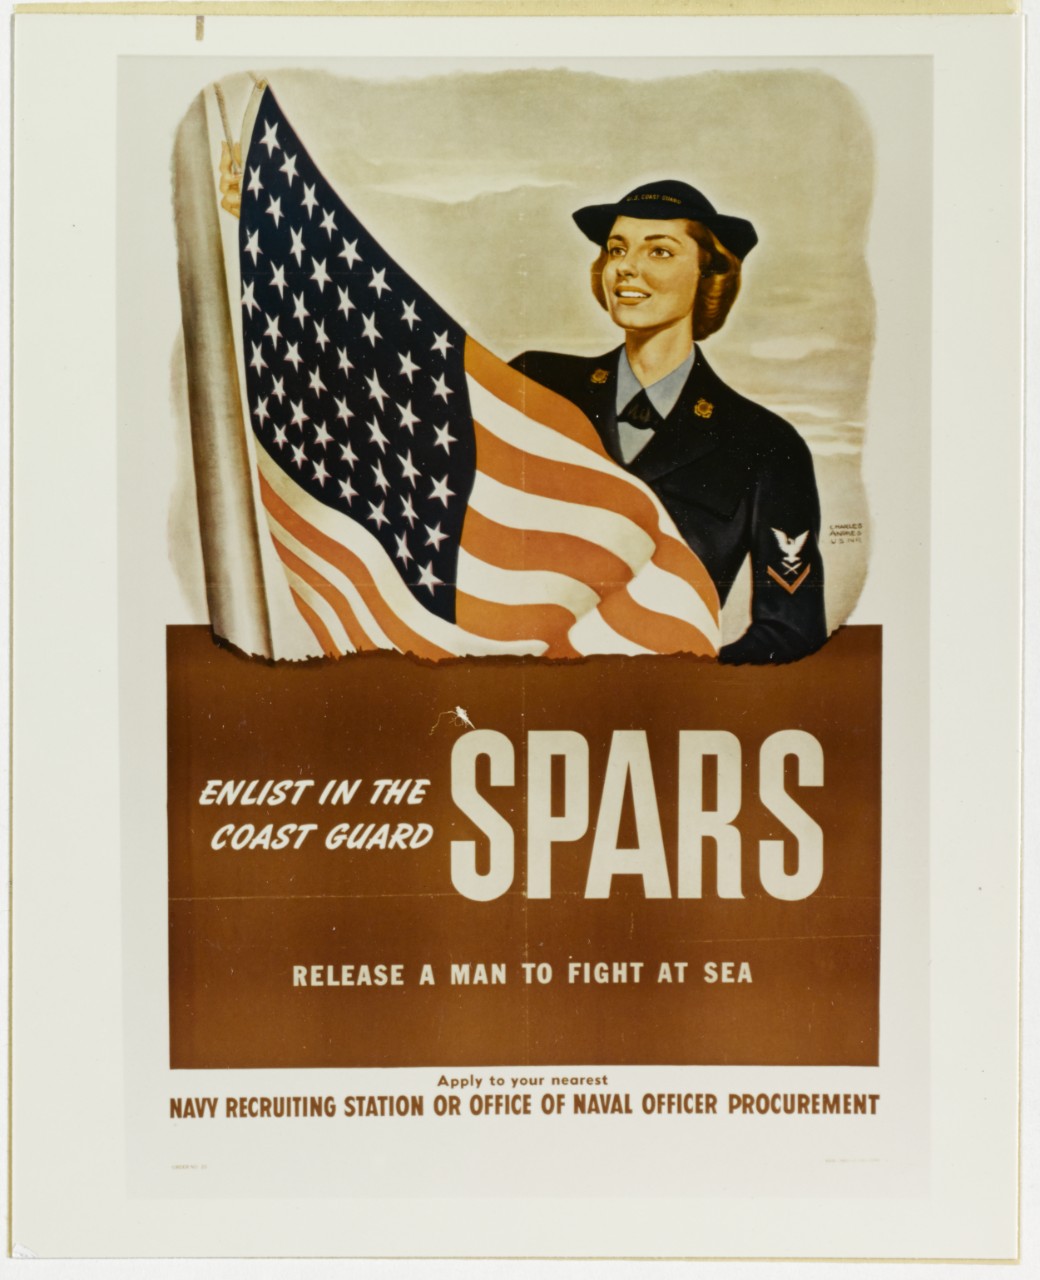 SPARS recruiting poster